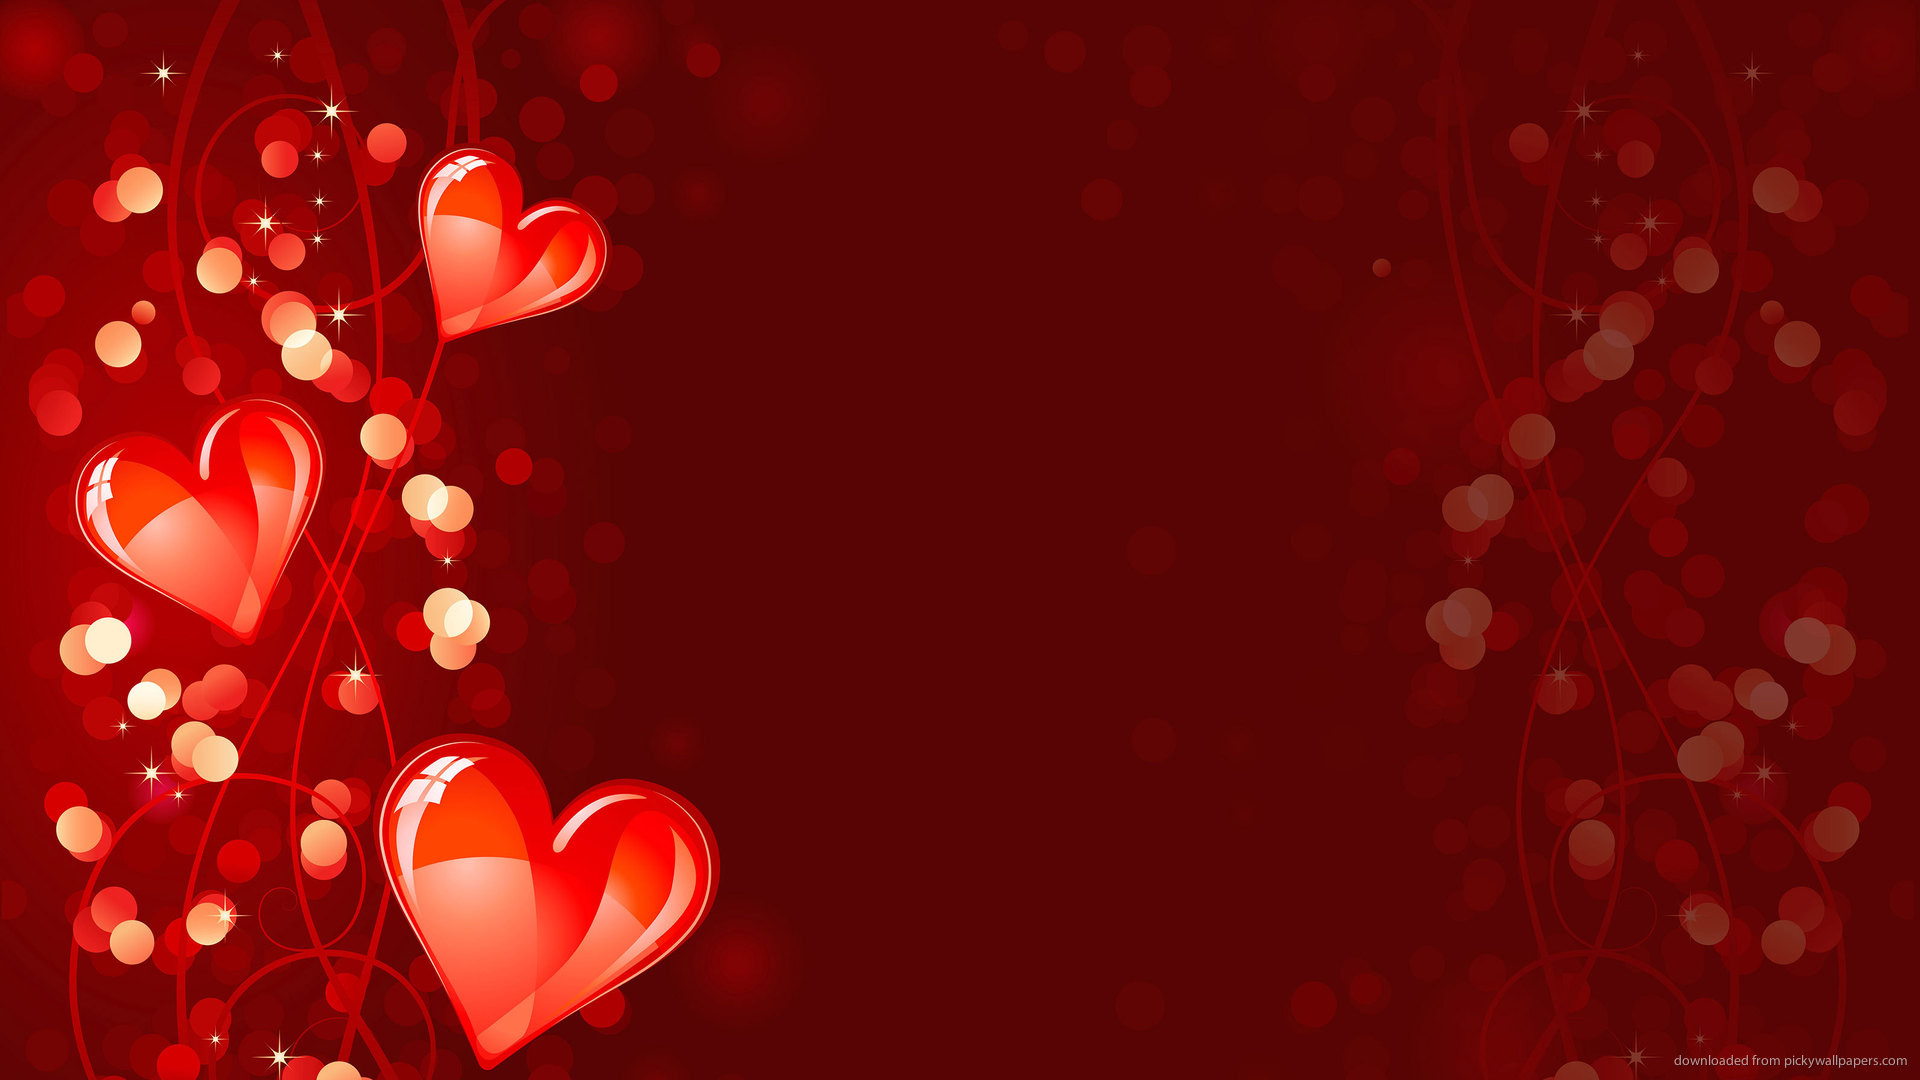 1920x1080 iPad, Valentine's Day Hearts Beckground Screensaver For Kindle3 And DX .